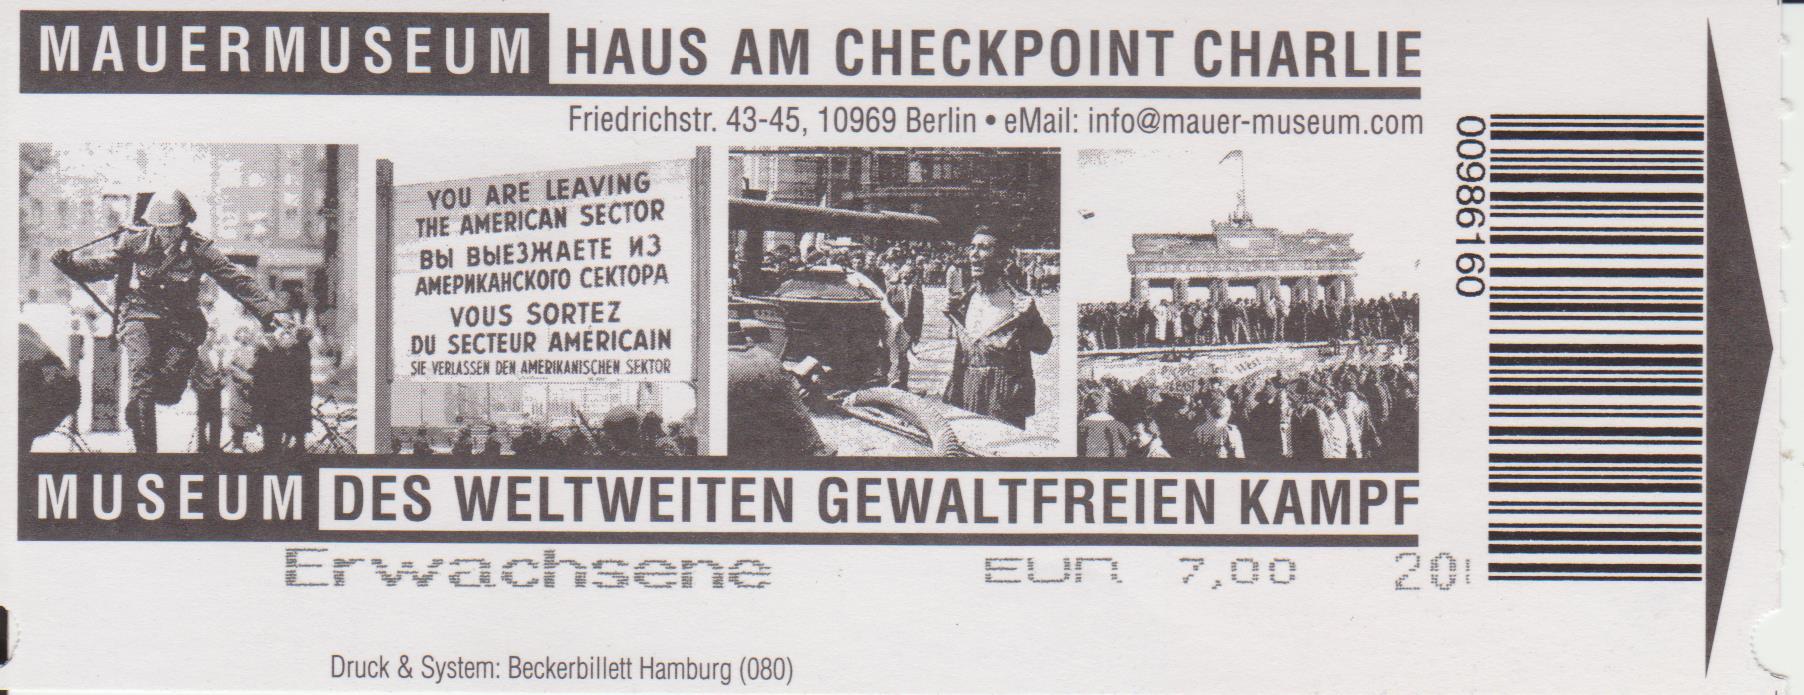 38) Mauermuseum - Checkpoint Charlie